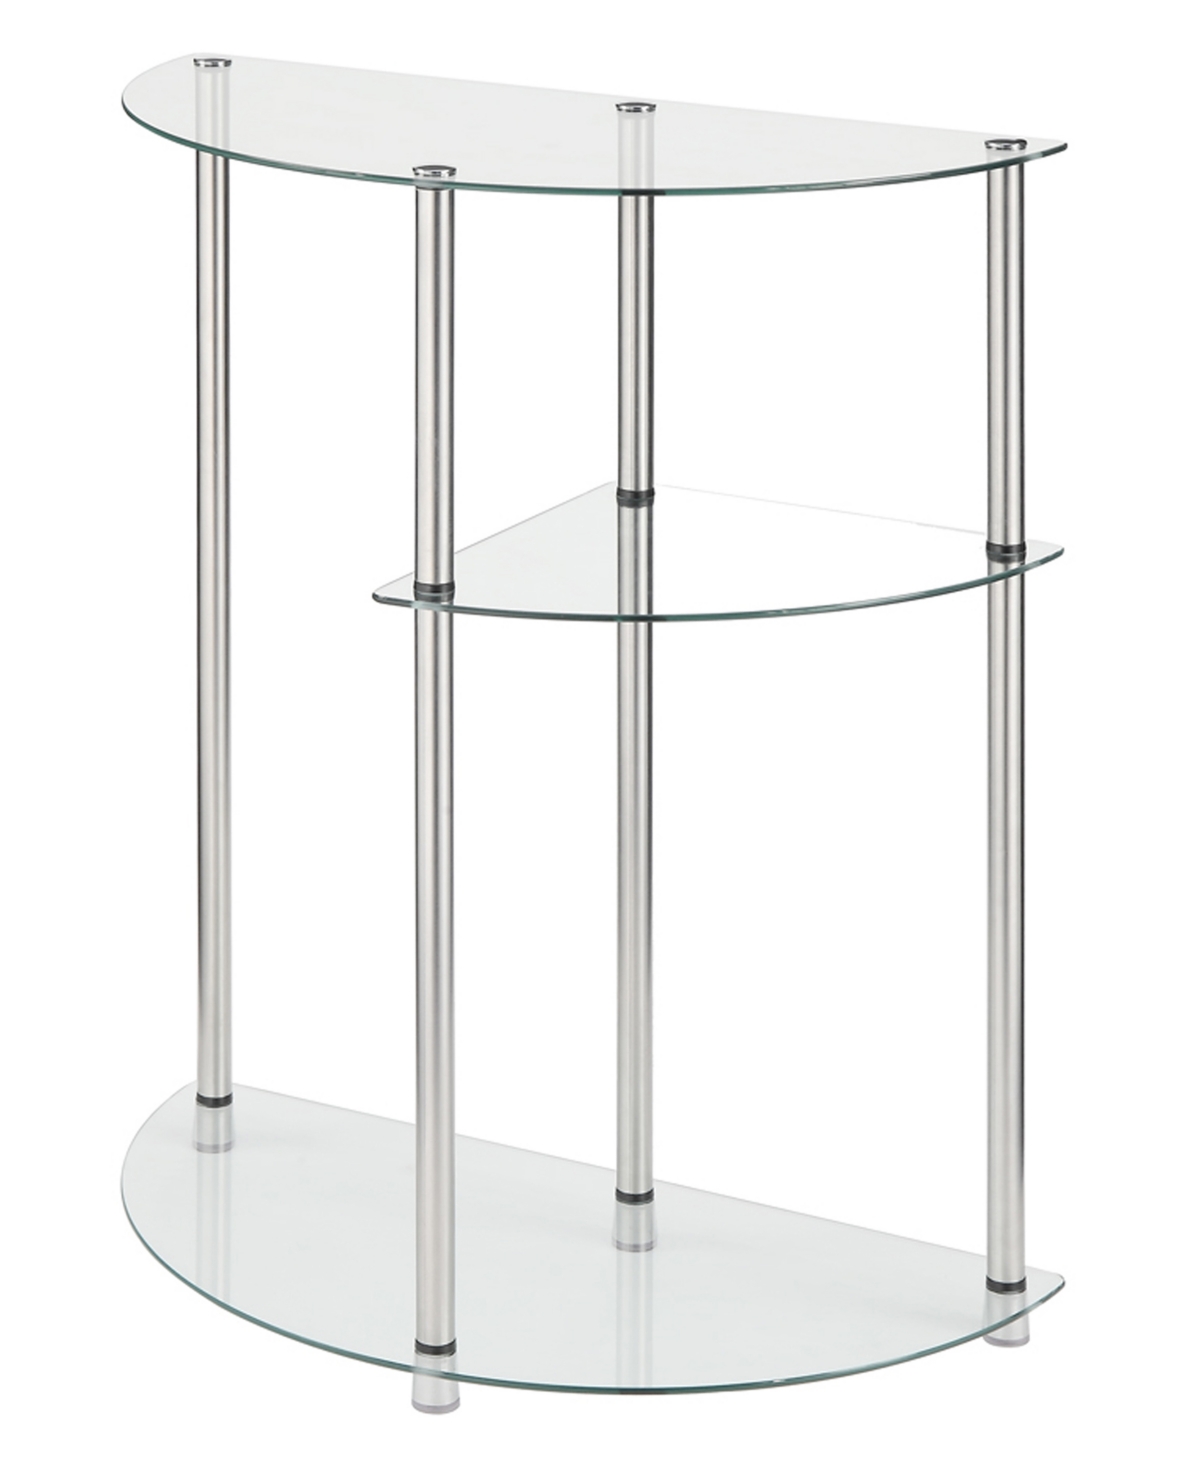 Convenience Concepts 23" Glass Designs2go 3 Tier Display Entry Table